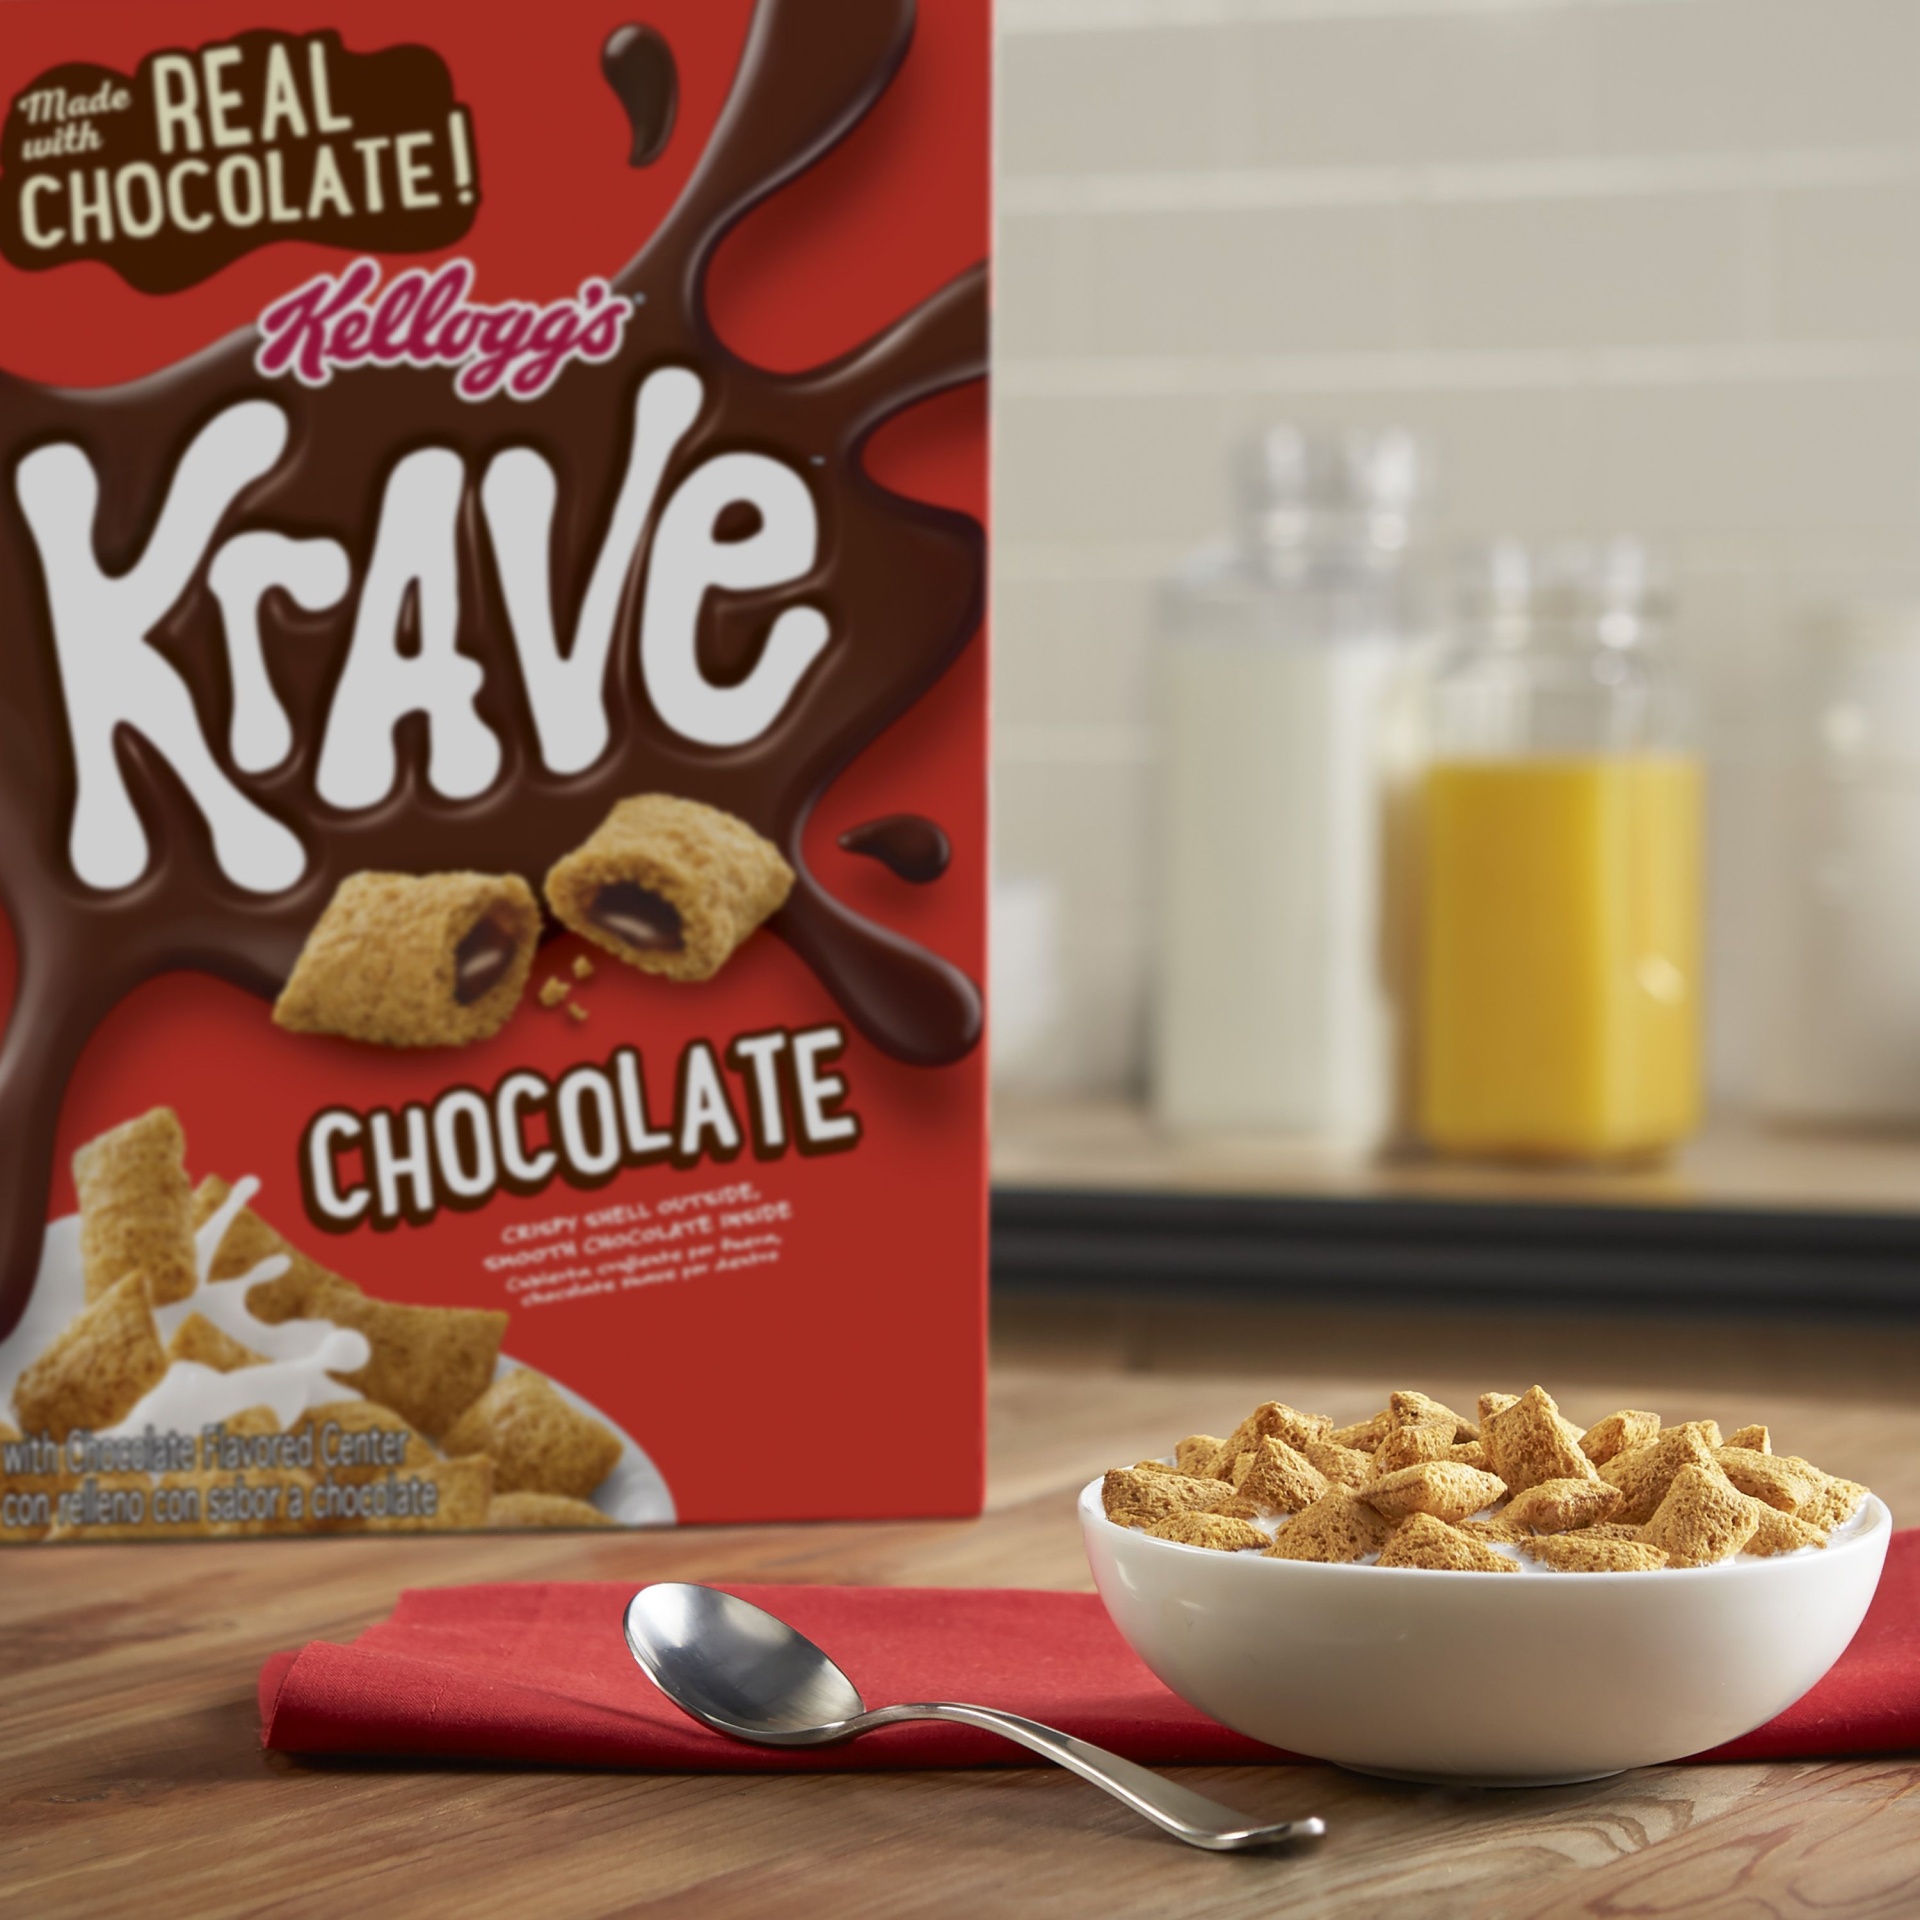 slide 4 of 7, Krave Kellogg's Krave Cold Breakfast Cereal, 7 Vitamins and Minerals, Made with Whole Grain, Chocolate, 11.4 oz